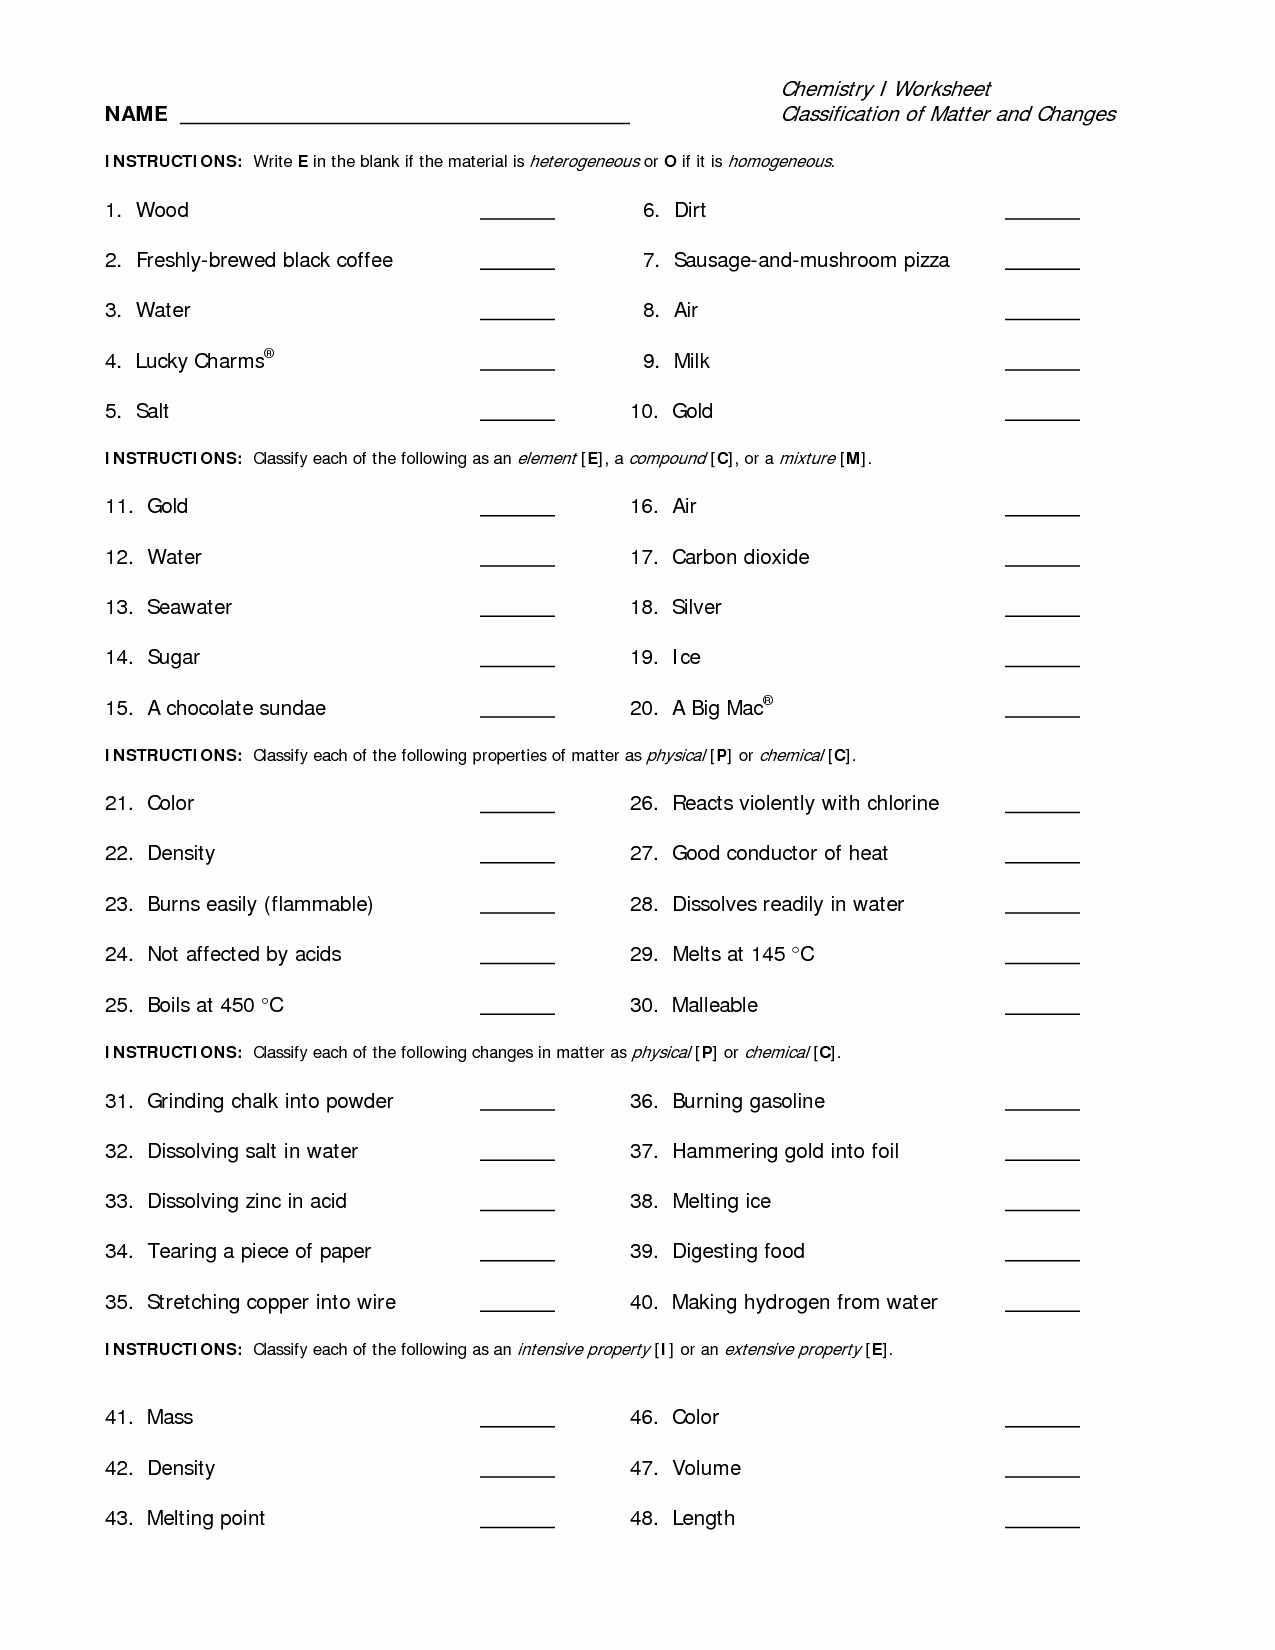 Composition Of Matter Worksheet Answers Beautiful Classifying Matter Worksheet Answers Ils